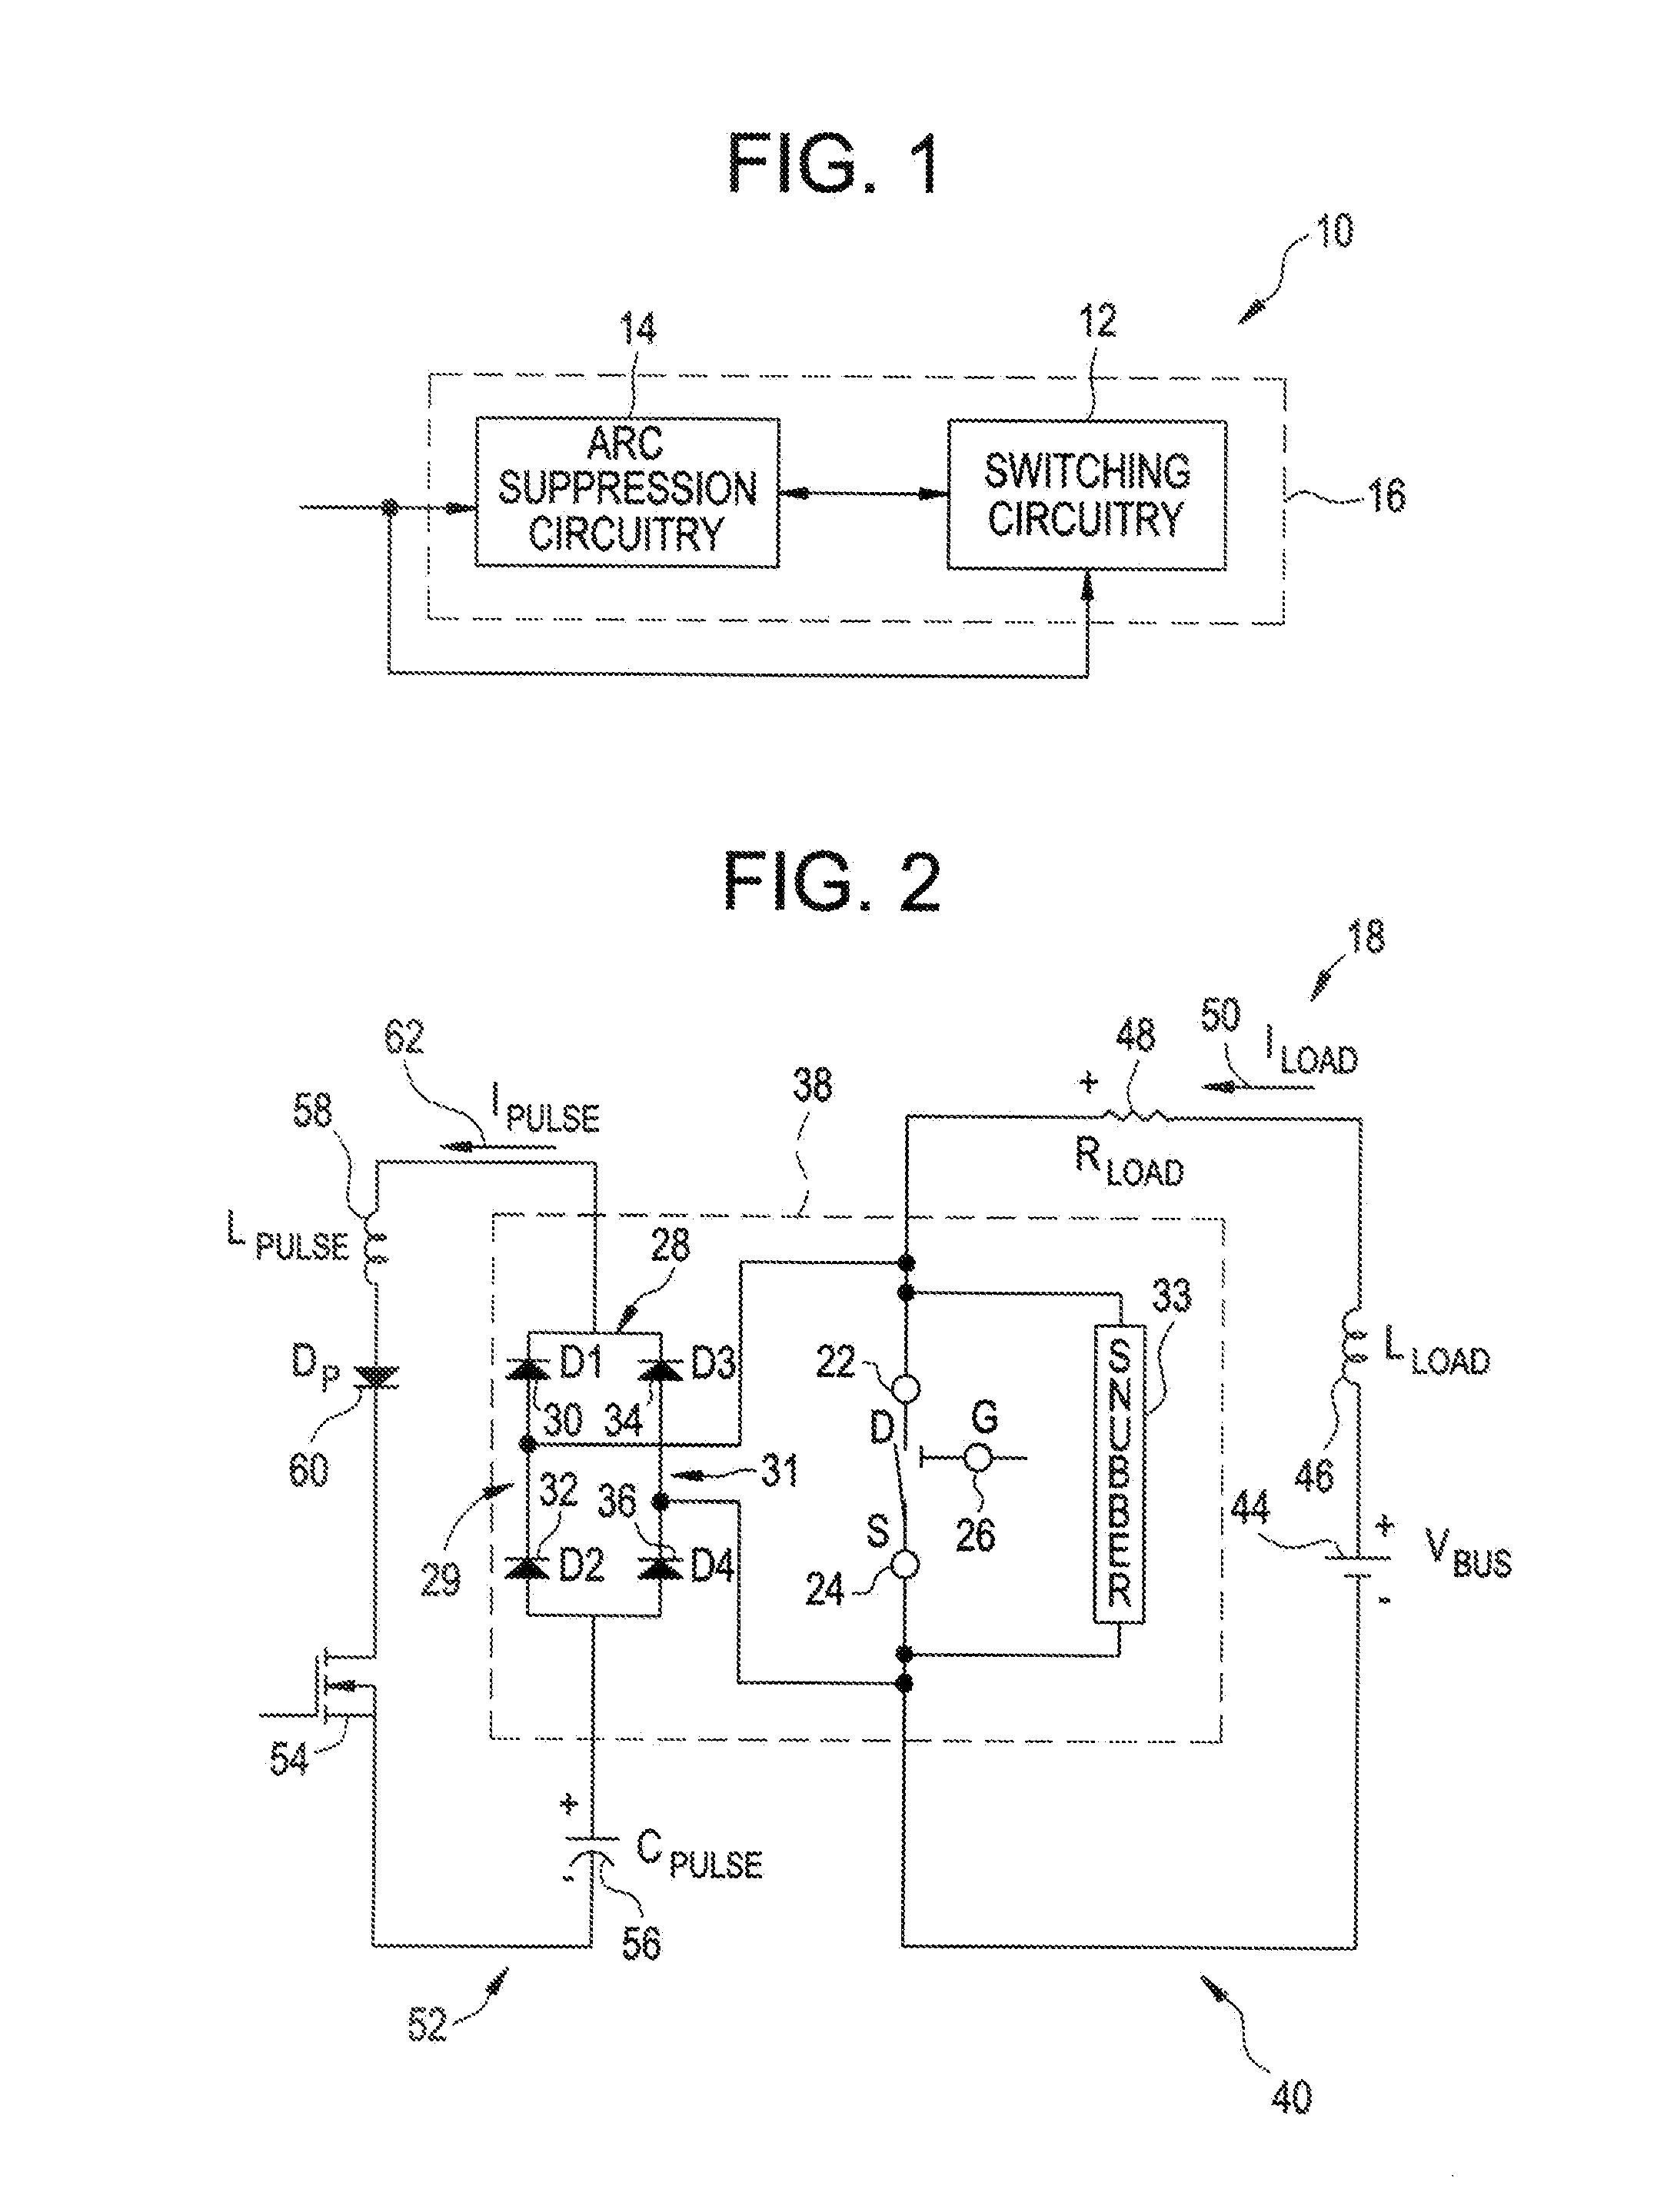 Micro-electromechanical system based selectively coordinated protection systems and methods for electrical distribution